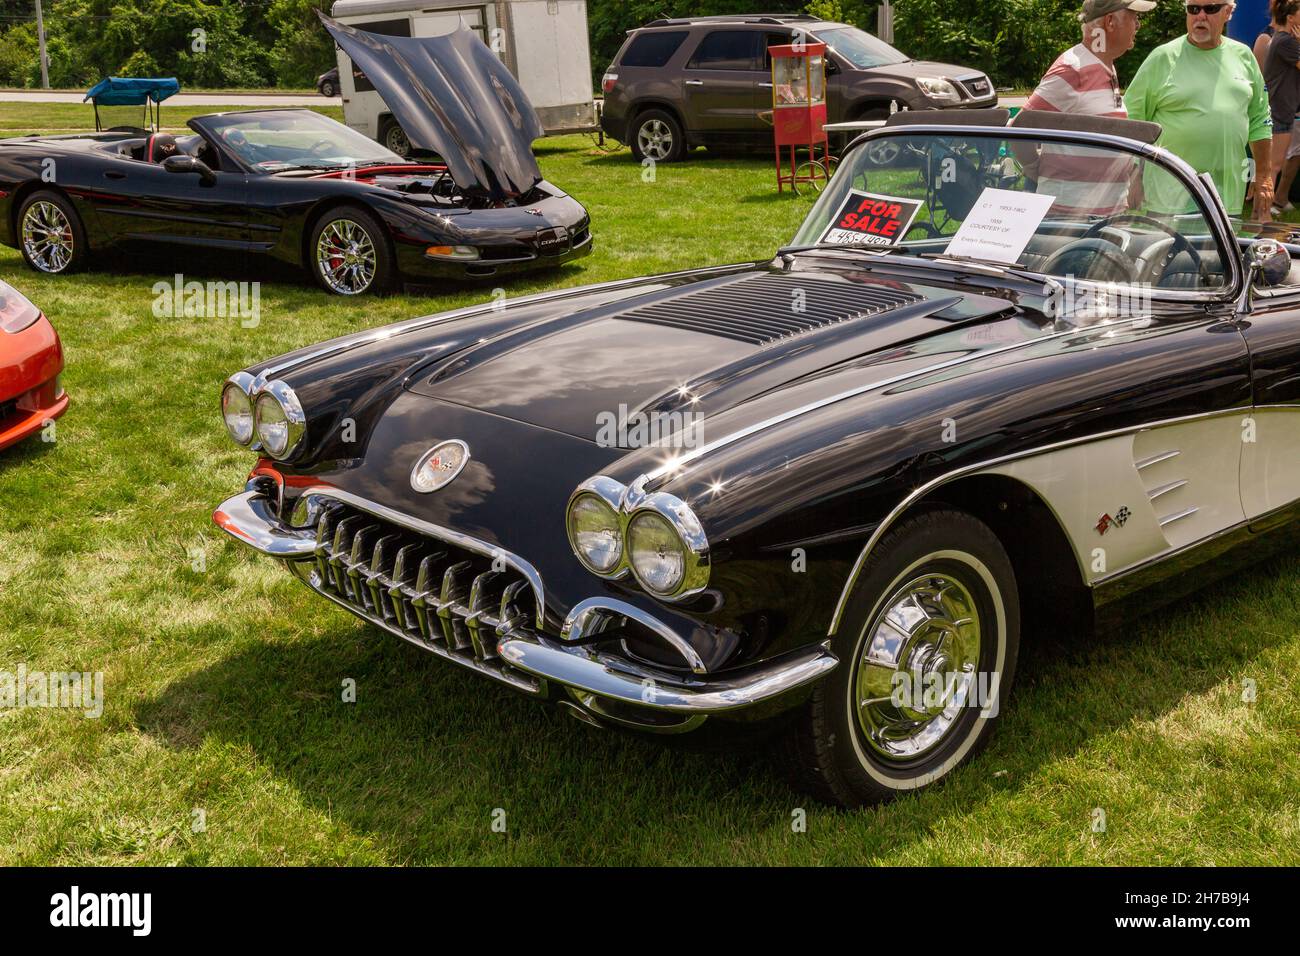 A black 1958 Chevrolet C1 Corvette convertible advertised for sale contrasts with the C5 Corvette at a car show in Fort Wayne, Indiana, USA. Stock Photo